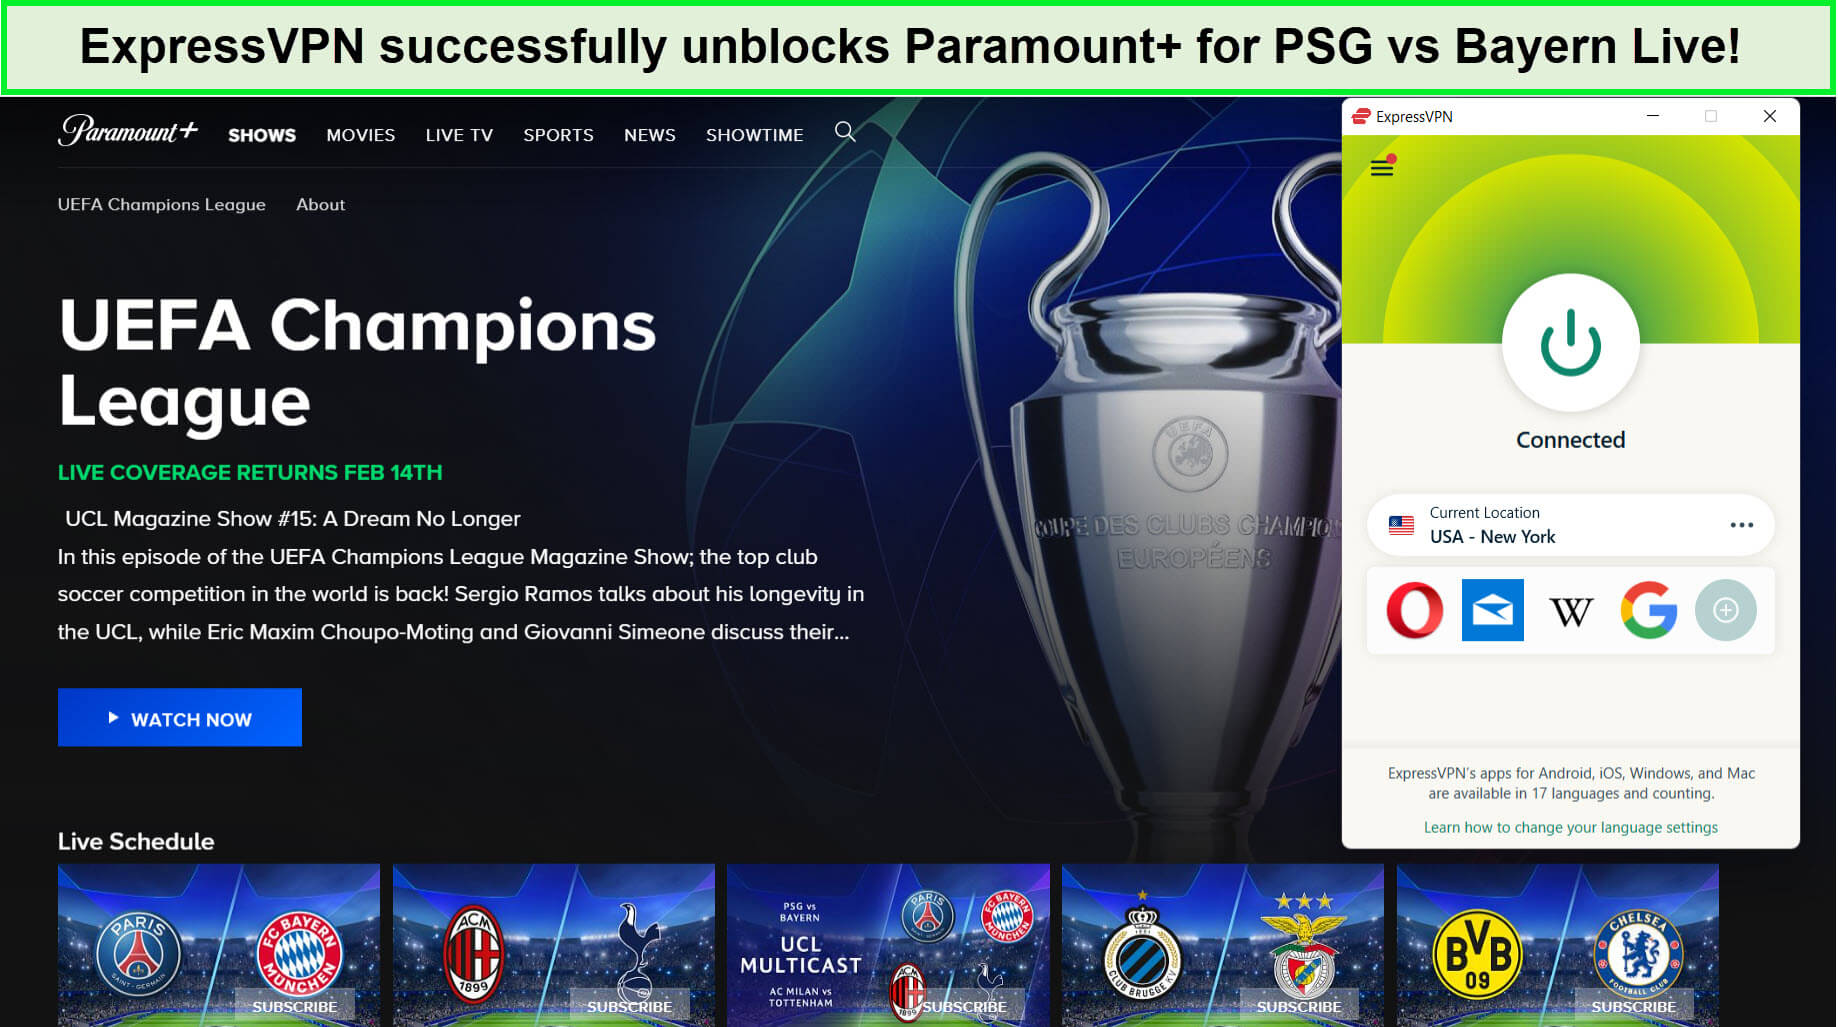 paramount-plus-unblocked-with-expressvpn-for-psg-vs-bayern-live-in-australia